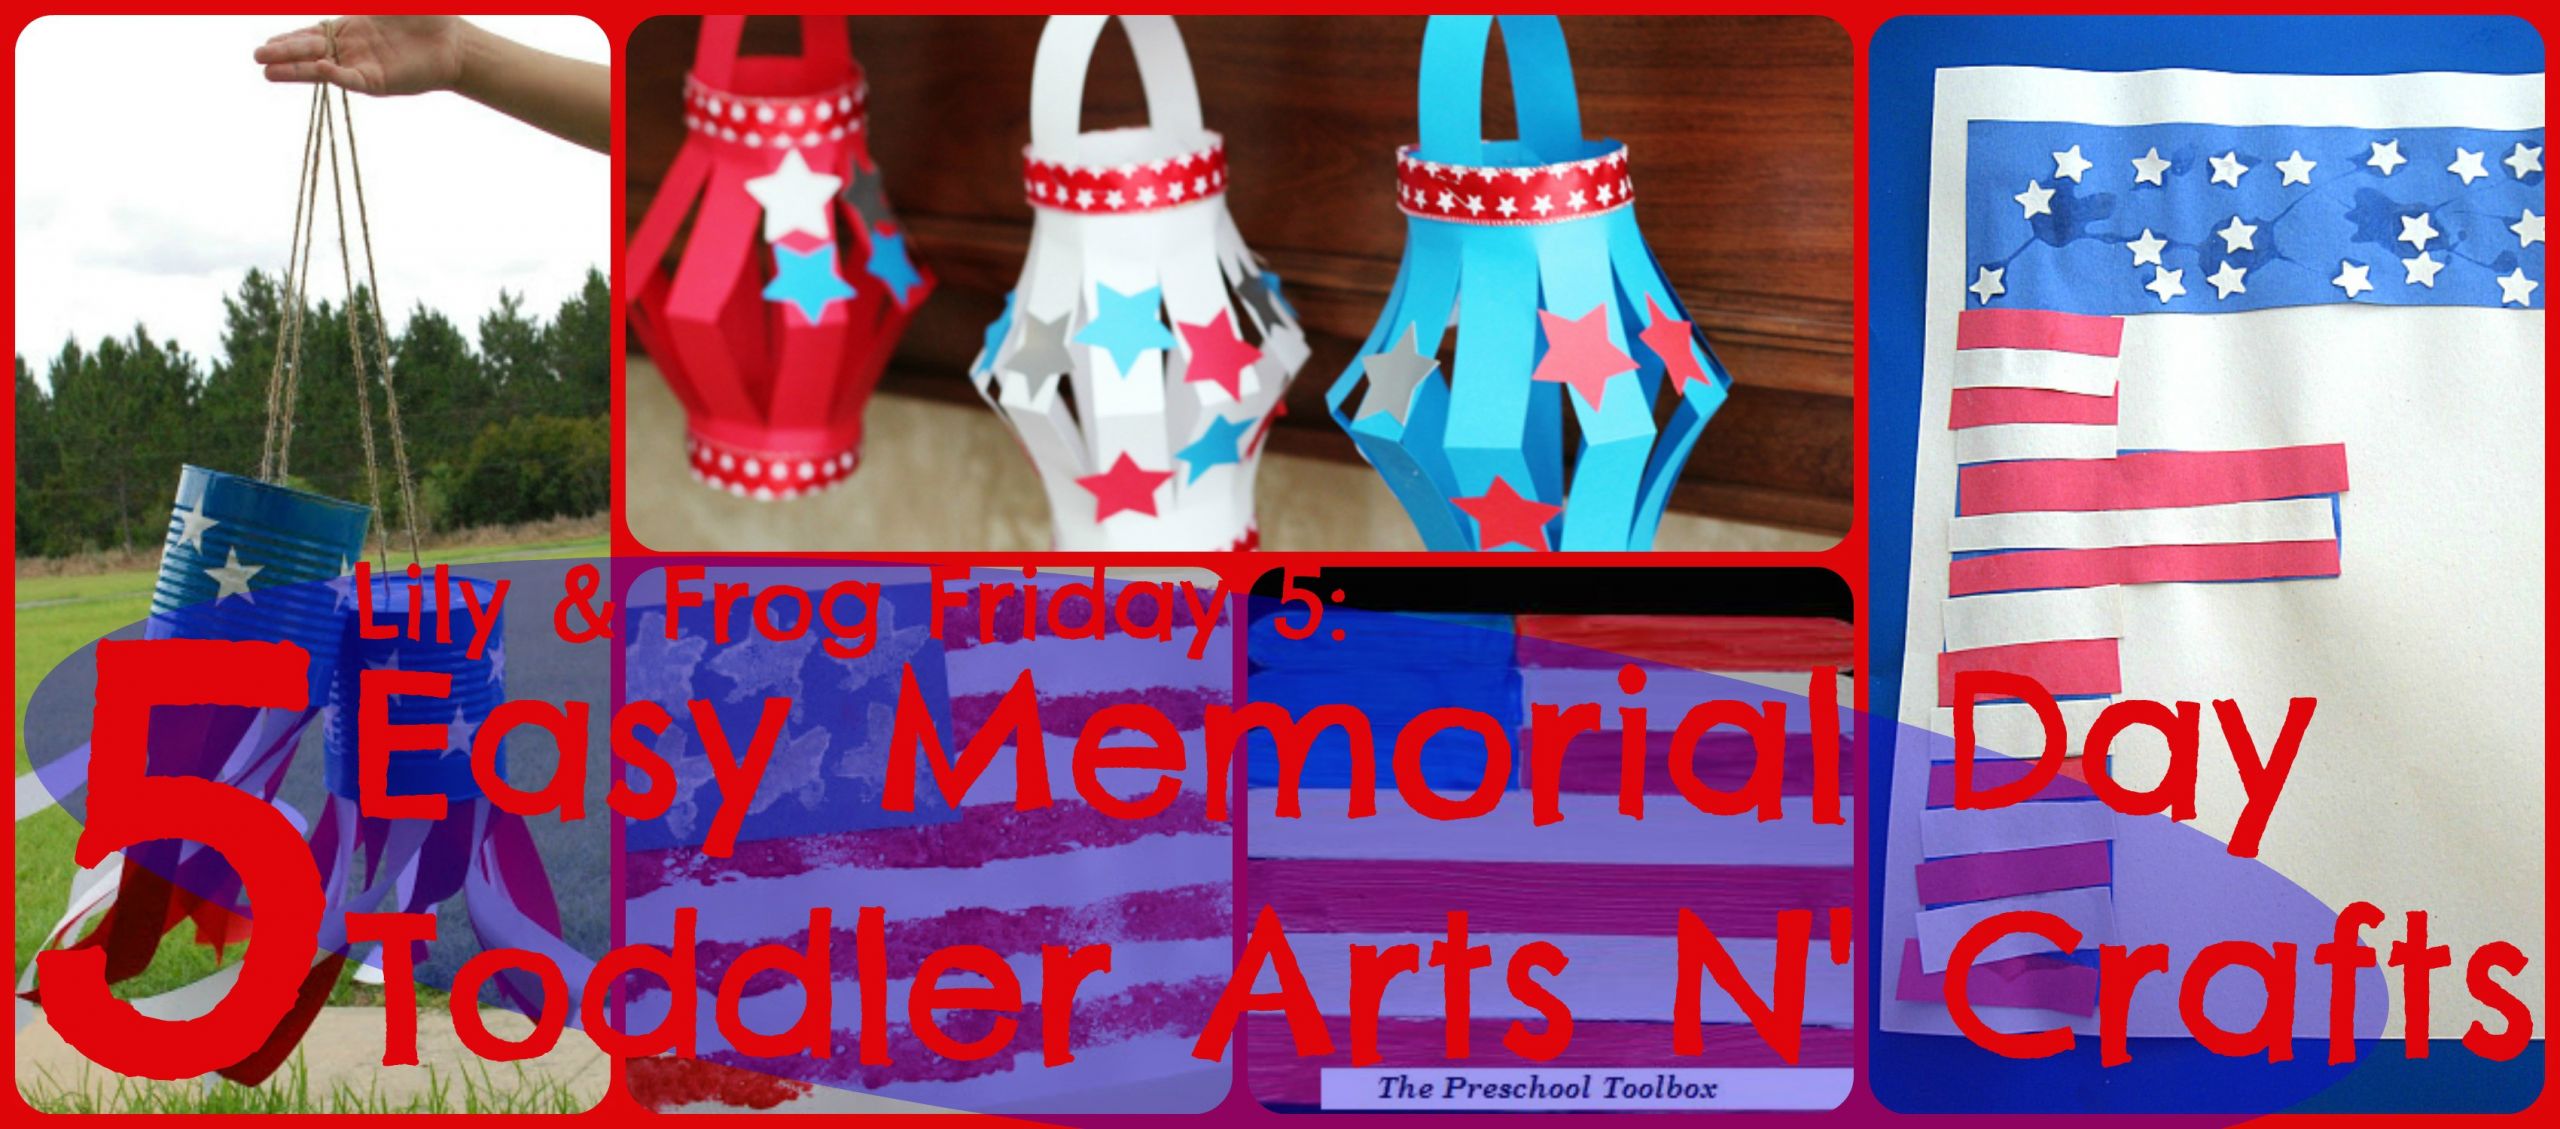 Memorial Day Arts And Crafts
 Lily & Frog Friday 5 5 Easy Memorial Day Toddler Arts N